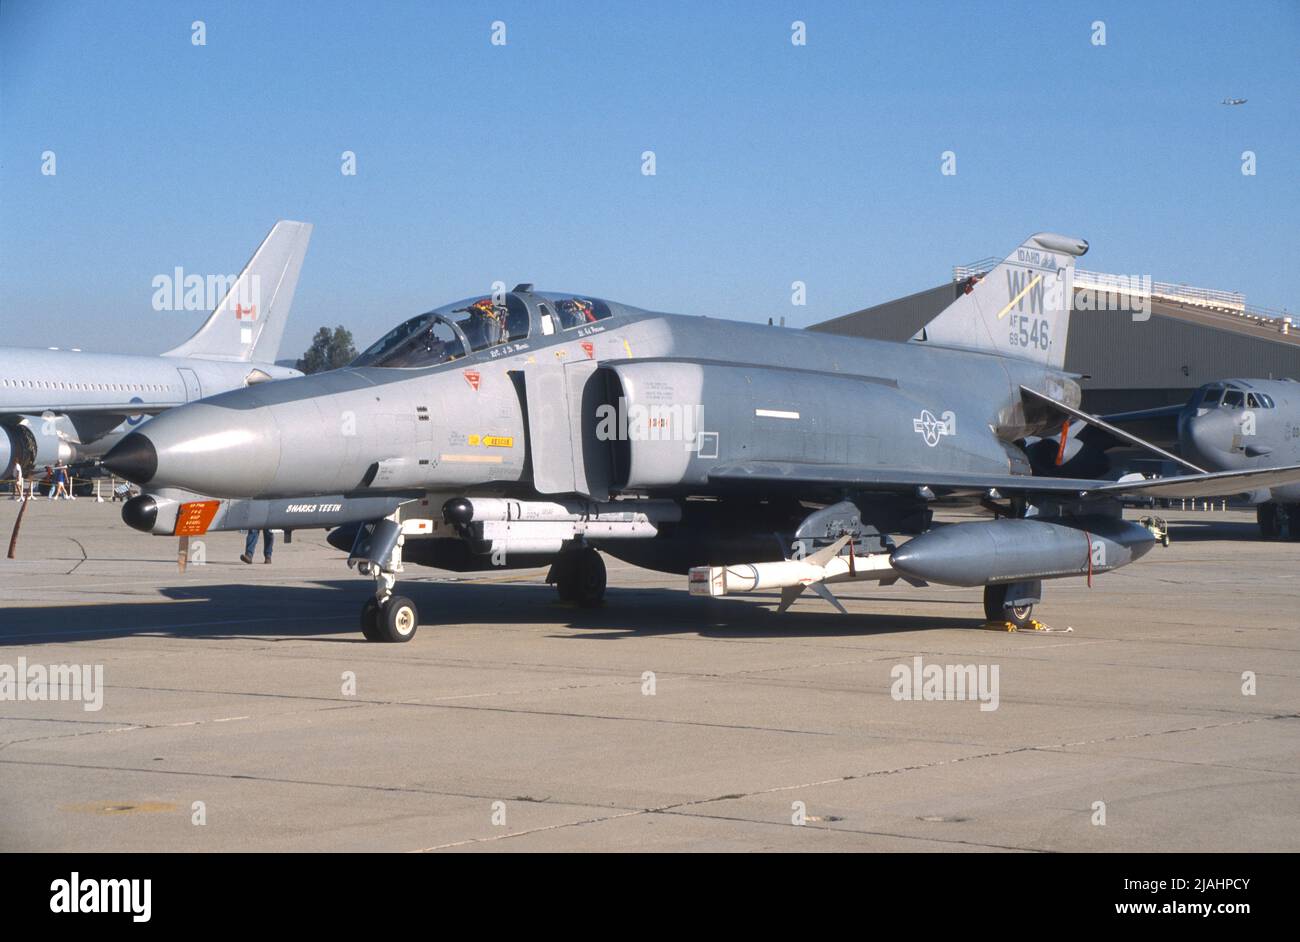 United States Air Force F4 Phantom from the Idaho Air National Guard on display Stock Photo